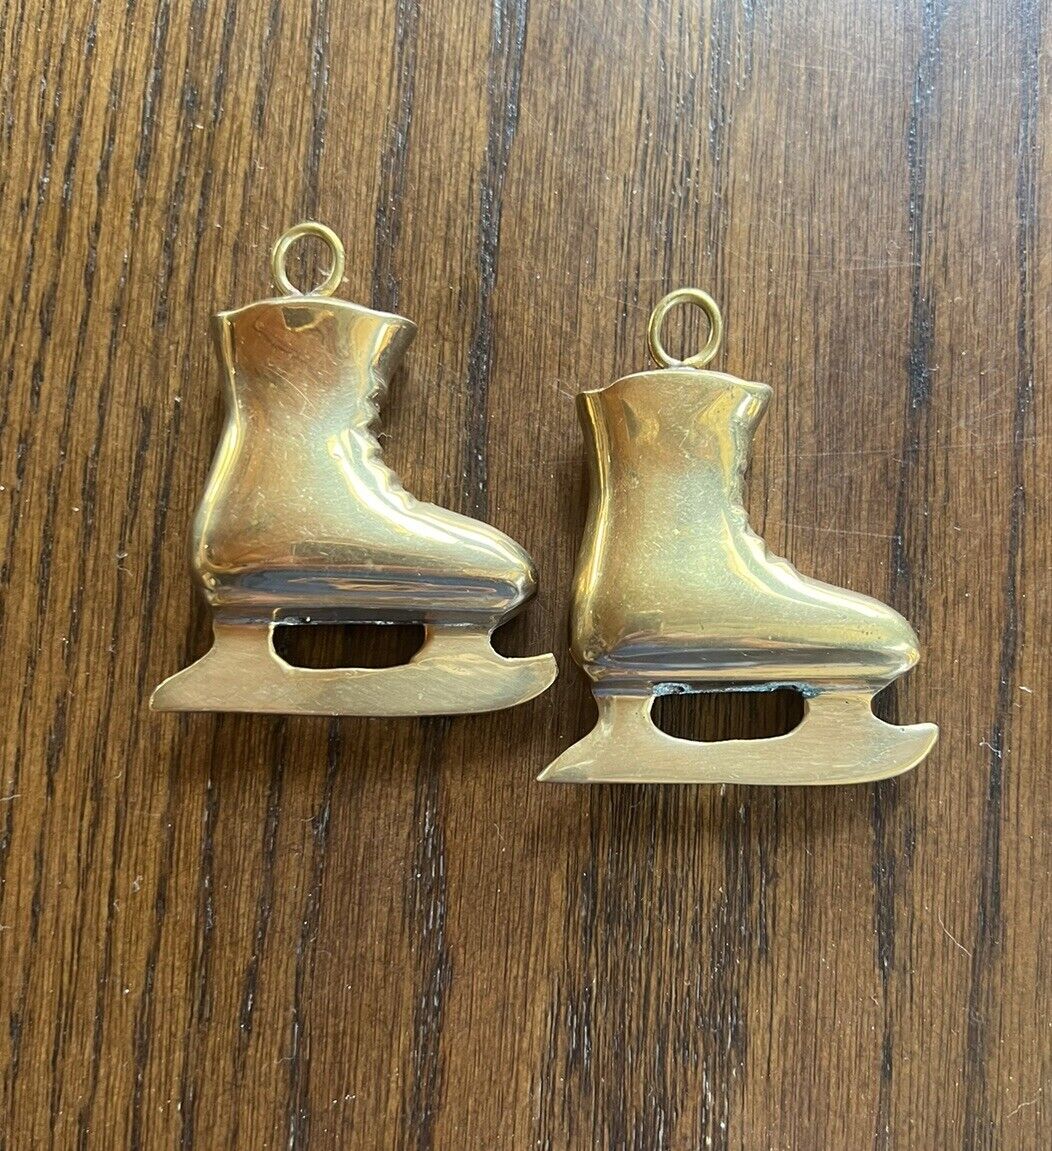 Vintage Brass Pair Of Ice Skates Ornaments *Please Read Description And See Pics